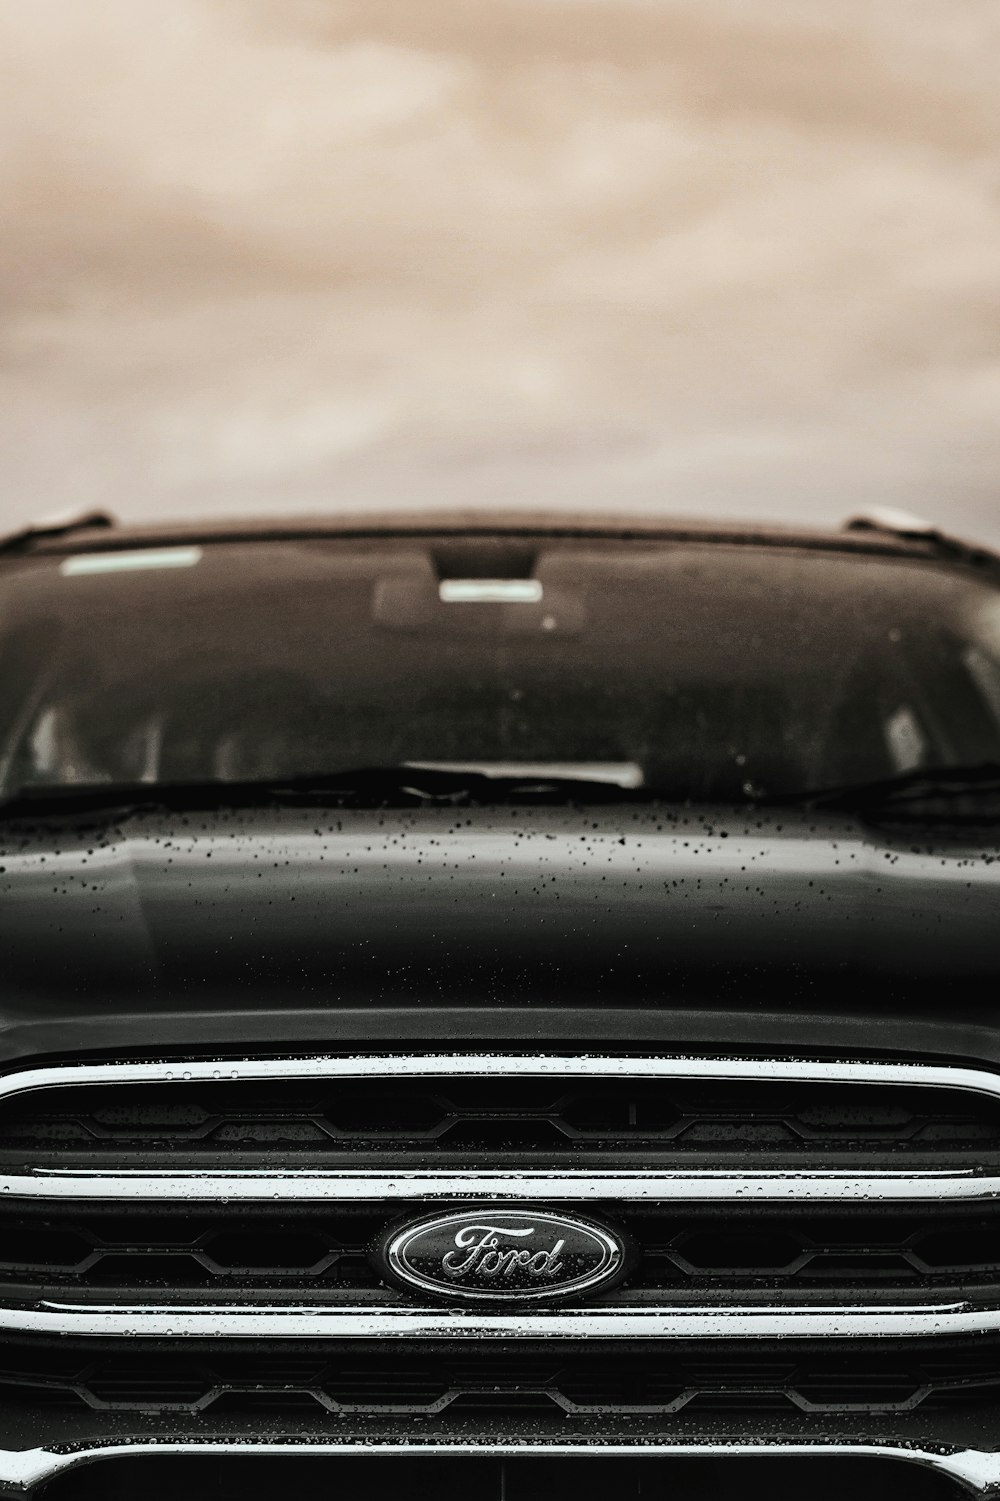 black Ford vehicle under cloudy sky